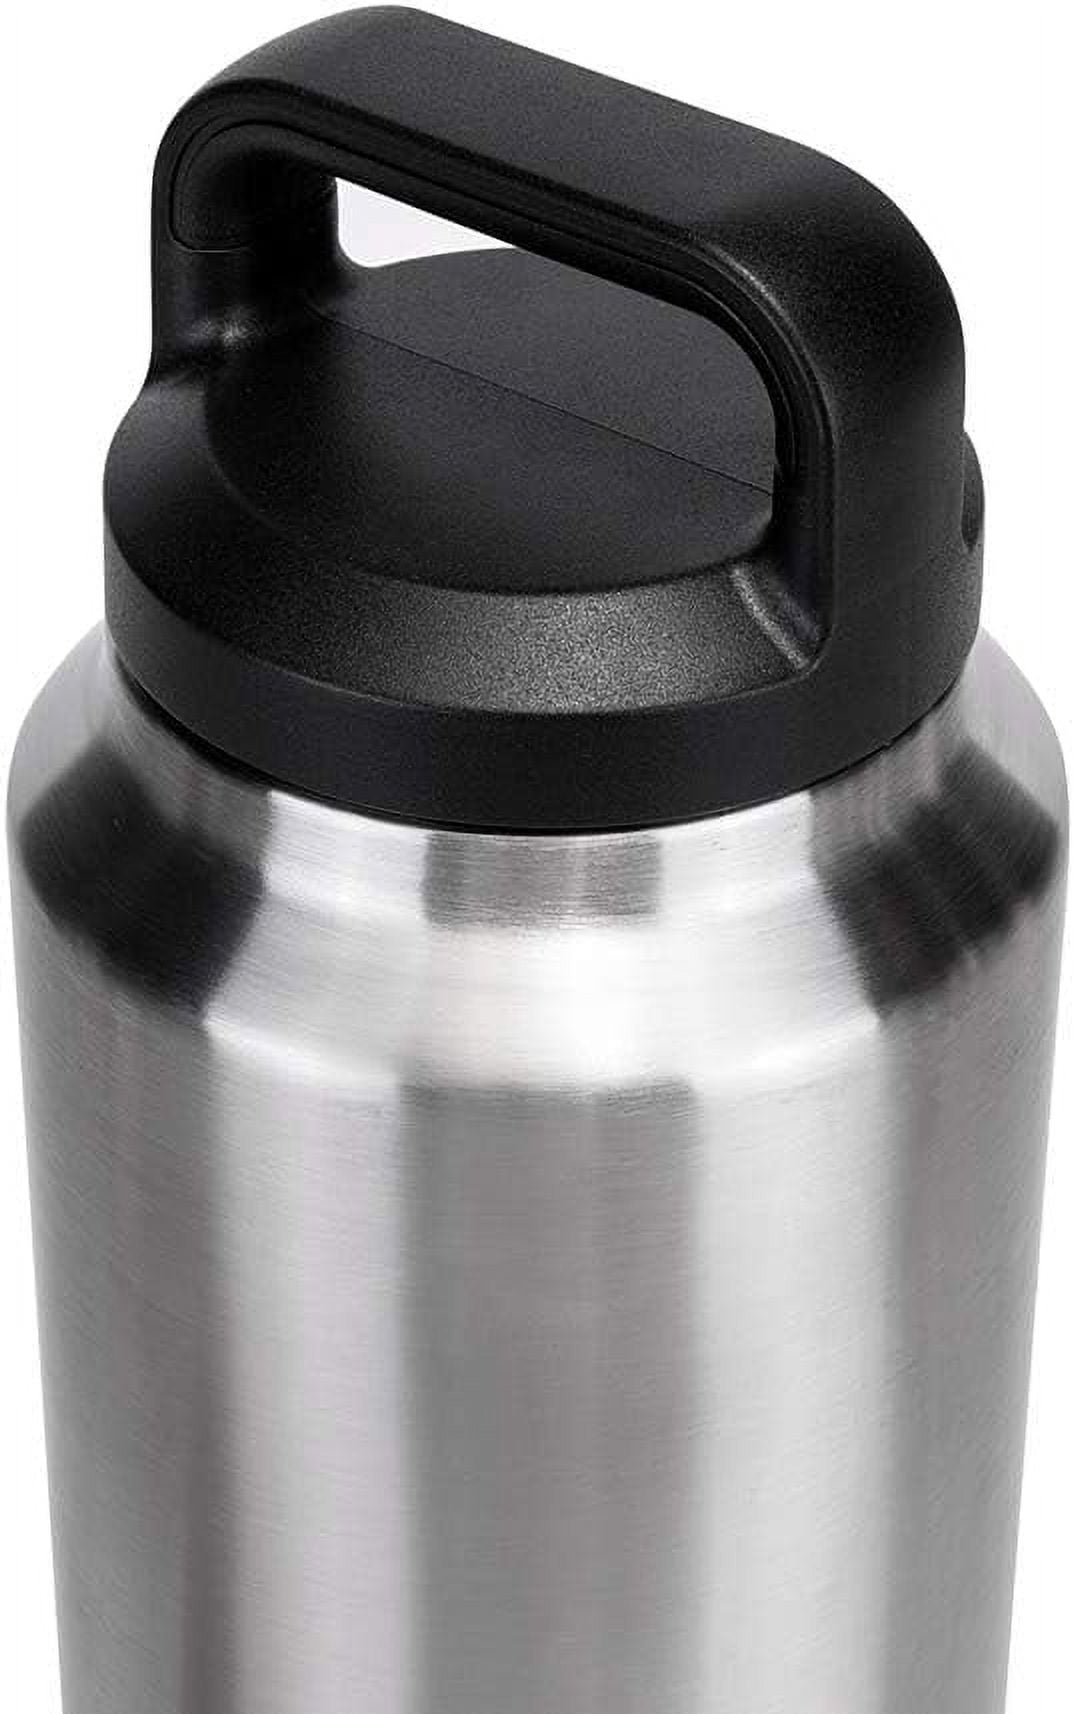  BIJISI Auto Spout Lid for YETI Rambler Bottles, Fits 18/26/36/64  oz Bottles, Chug Replacement Lid Cap with Push-Button Lid and Flexible  Handle : Sports & Outdoors